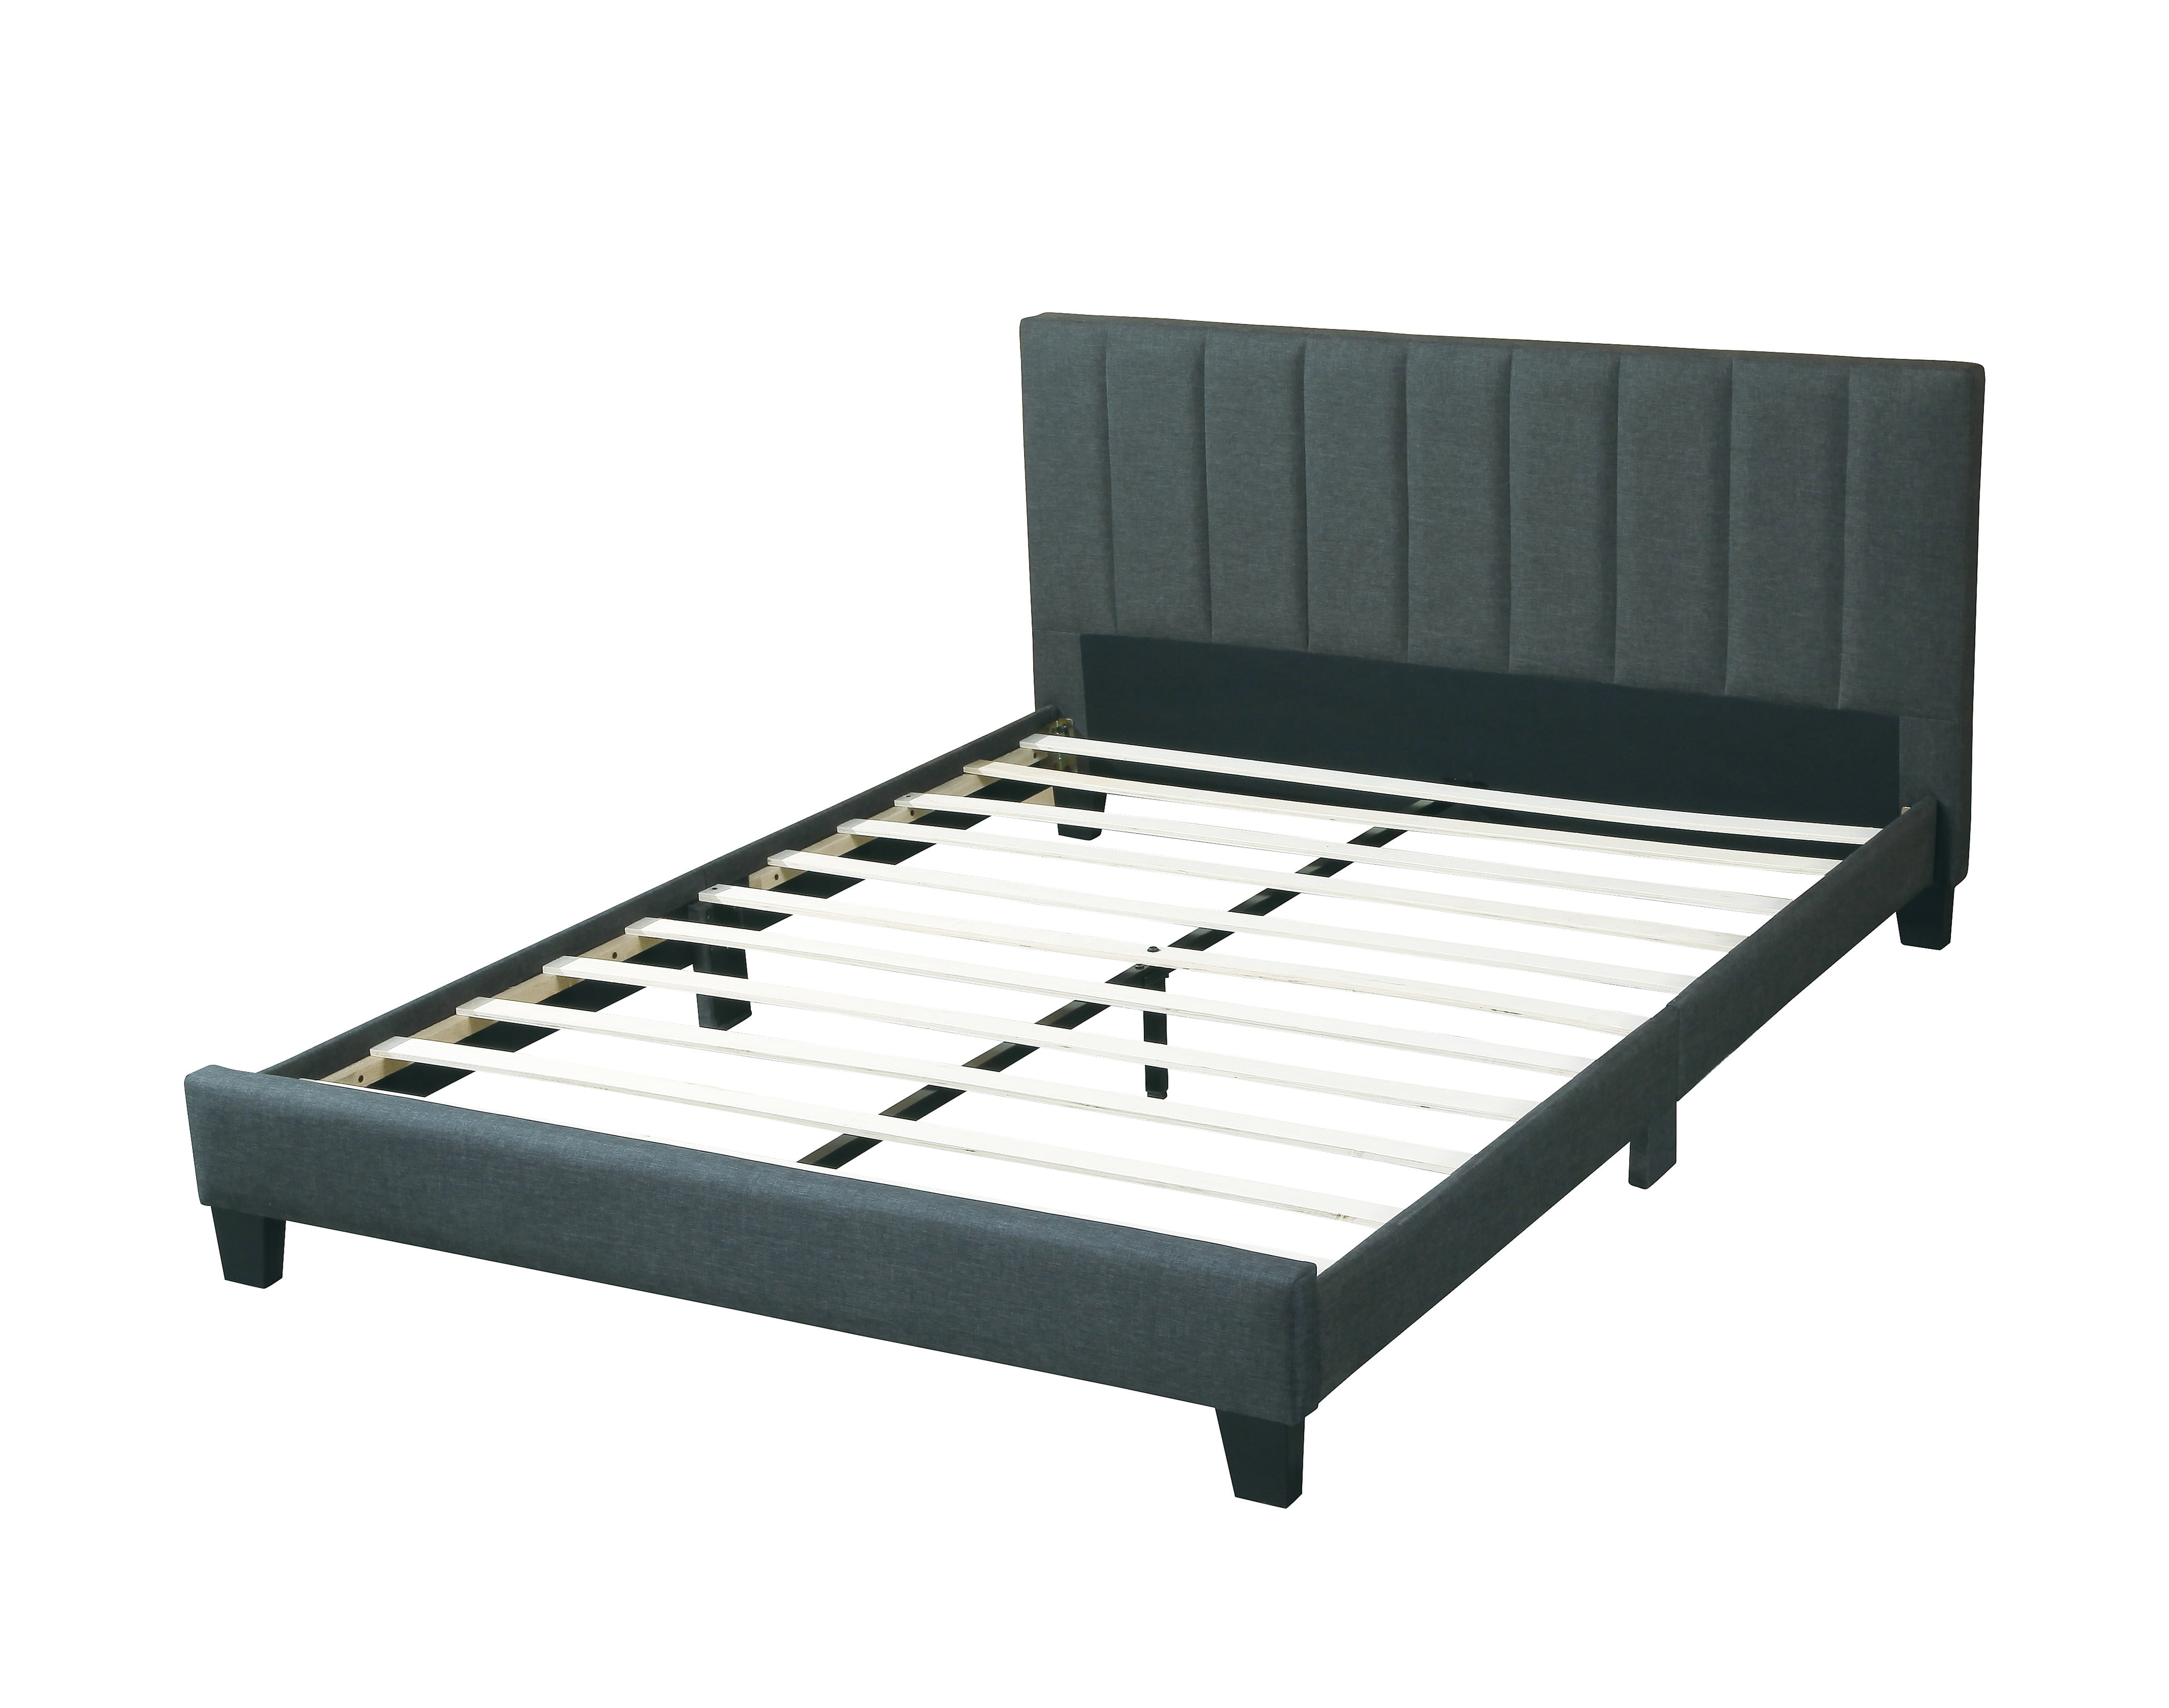 Vertical Tufting Bedroom 1pc Bed, Eastern King Bed Frame Dimensions